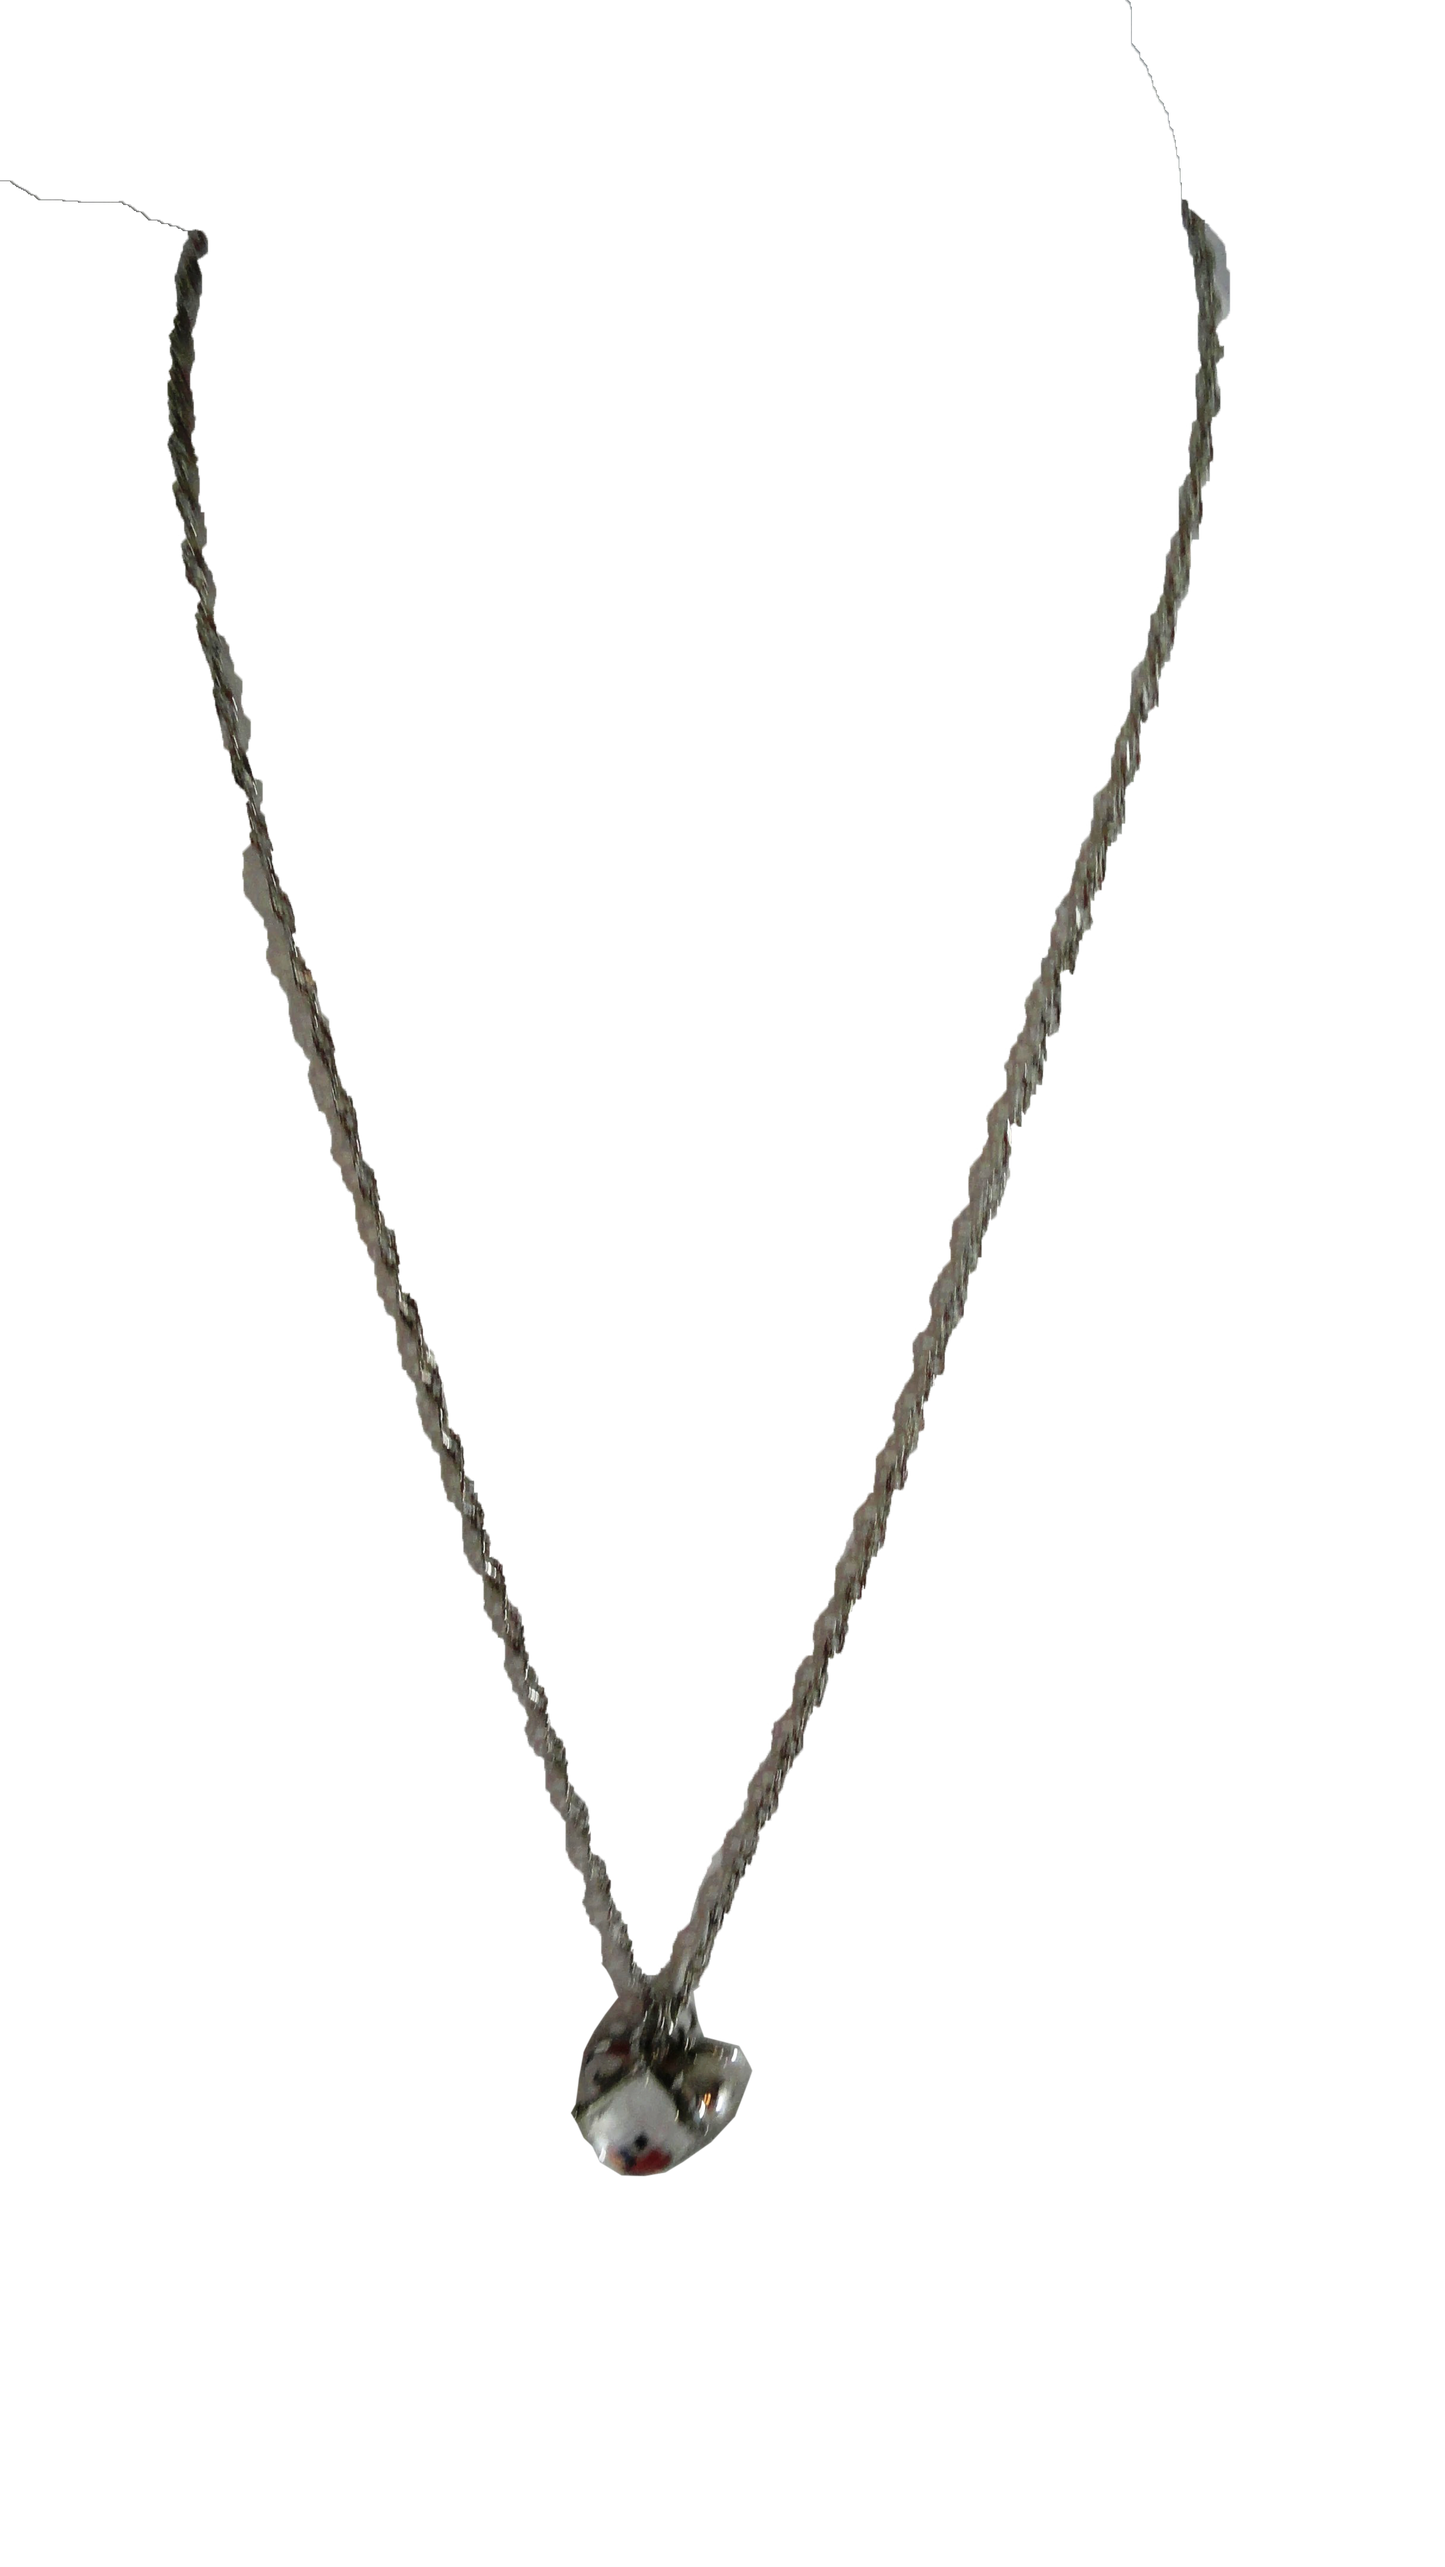 Necklace Silver with 3 Charms (SKU 004001-39)